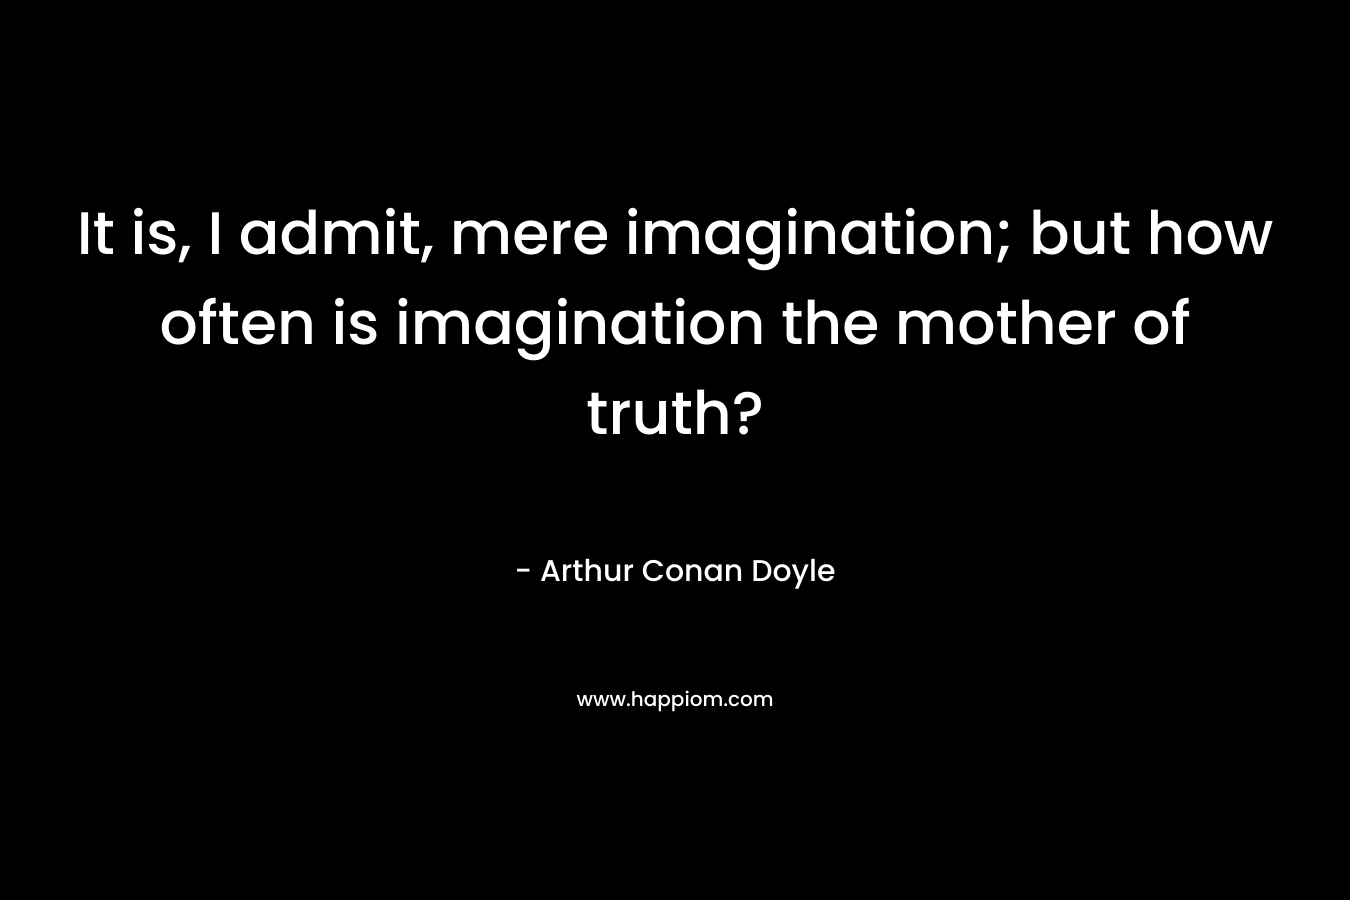 It is, I admit, mere imagination; but how often is imagination the mother of truth?